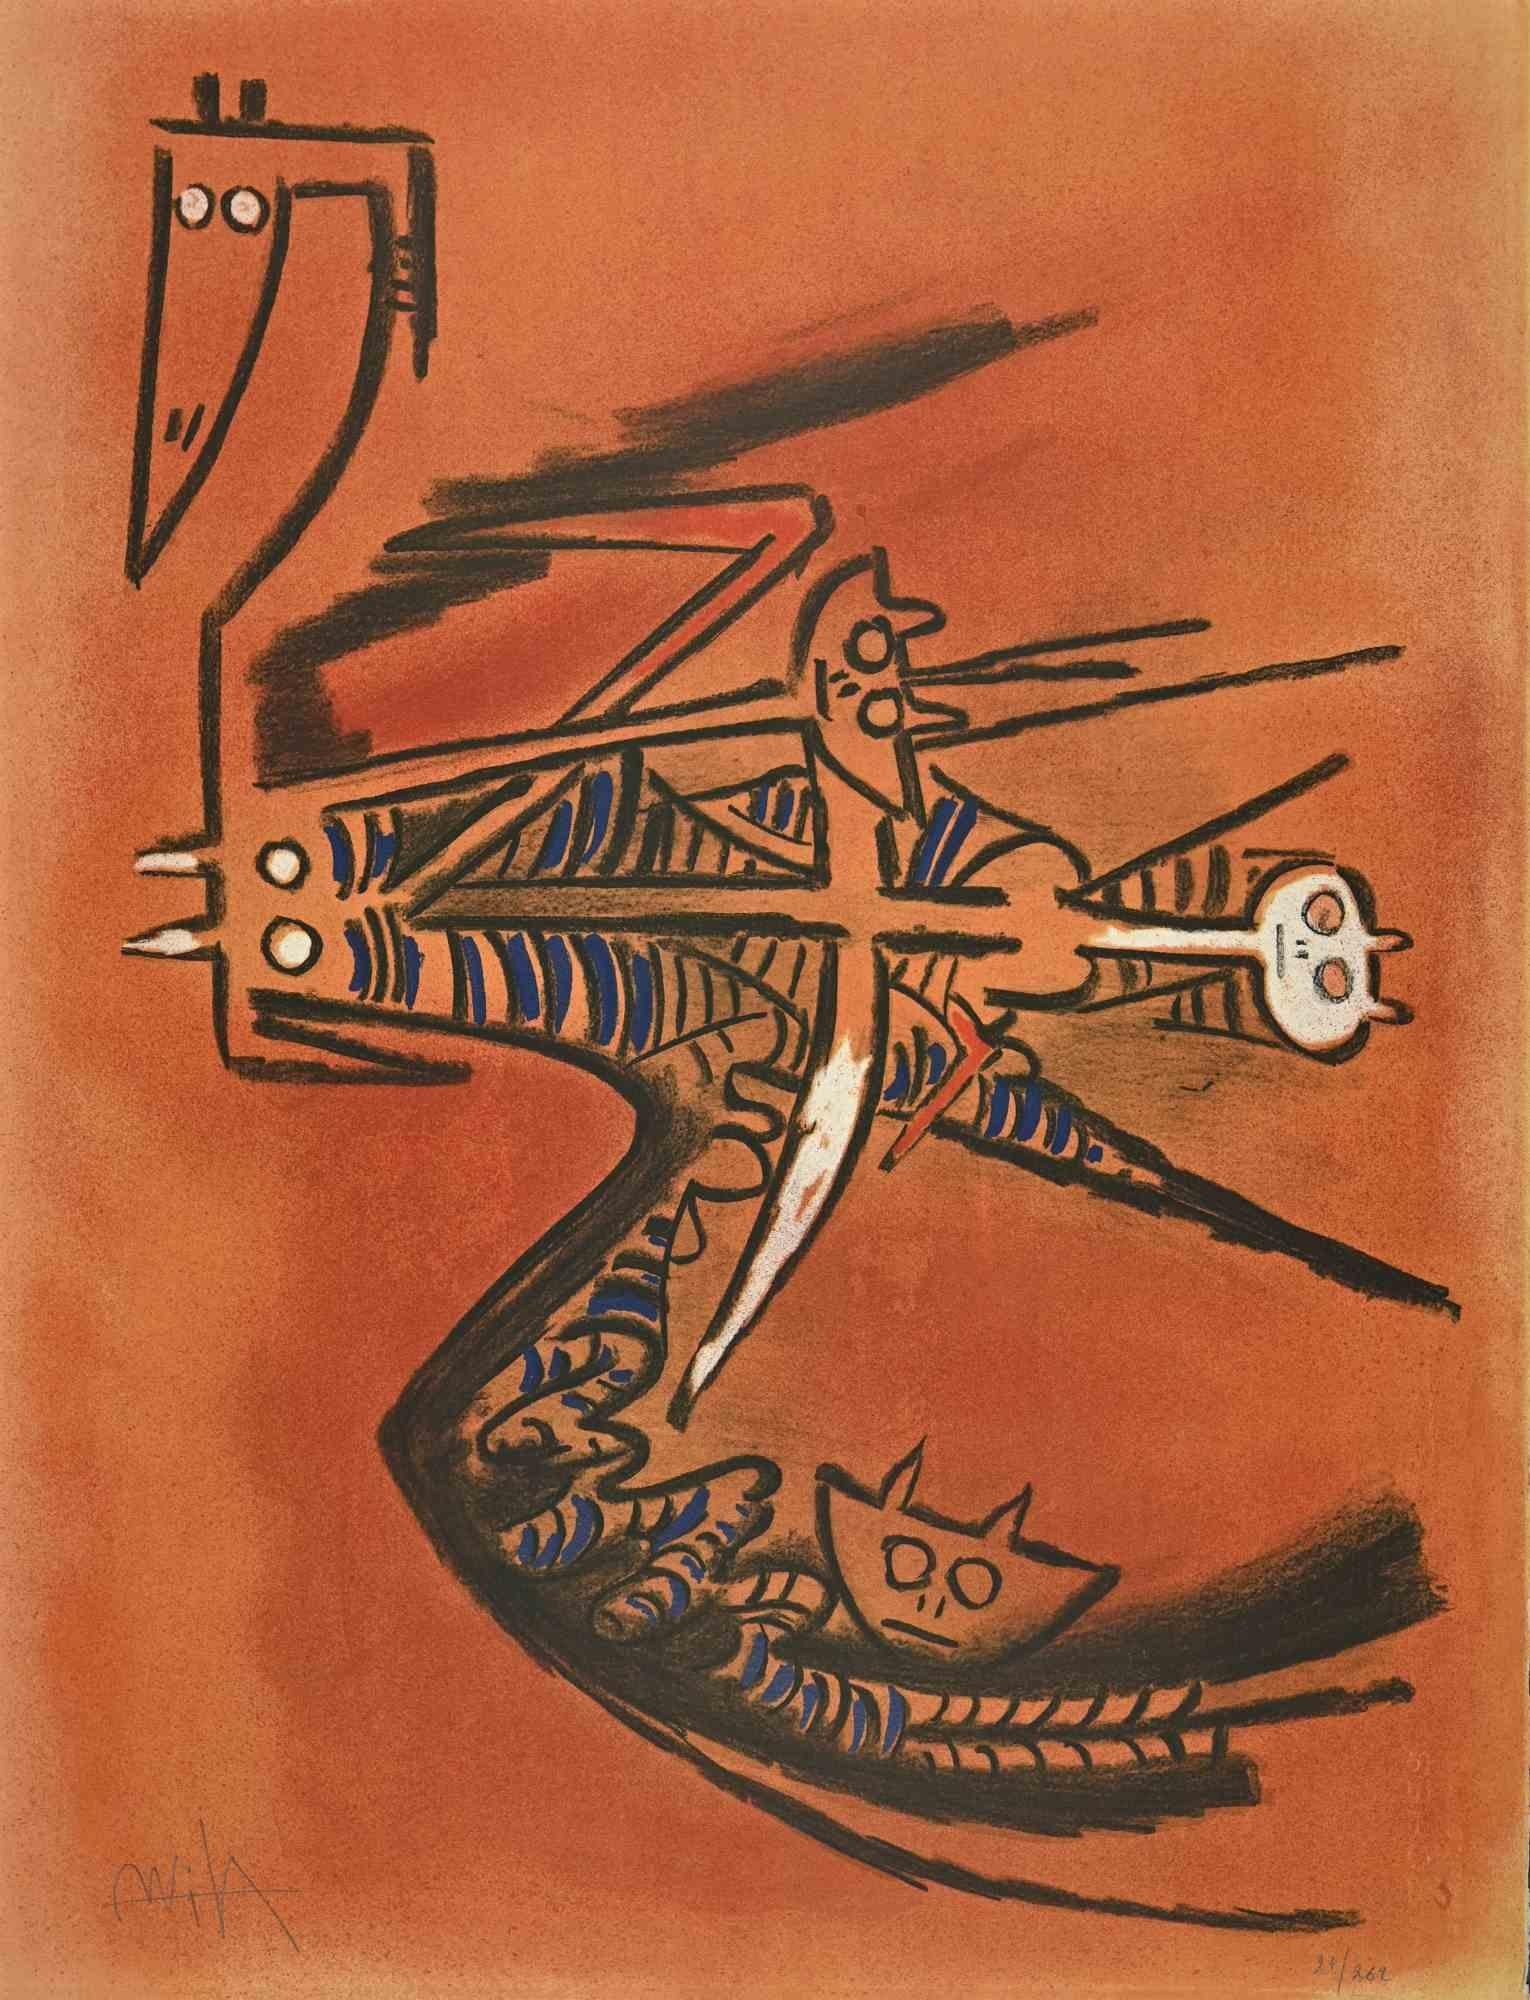 Soeur de la Gazelle - from the suite  "Pleni Luna" is a contemporary artwork realized by Wifredo Lam

Mixed colored lithograph.

Hand signed and numbered on the lower margin.

Edition of 27/262 prints.

Wifredo Lam was a Cuban artist inspired by and